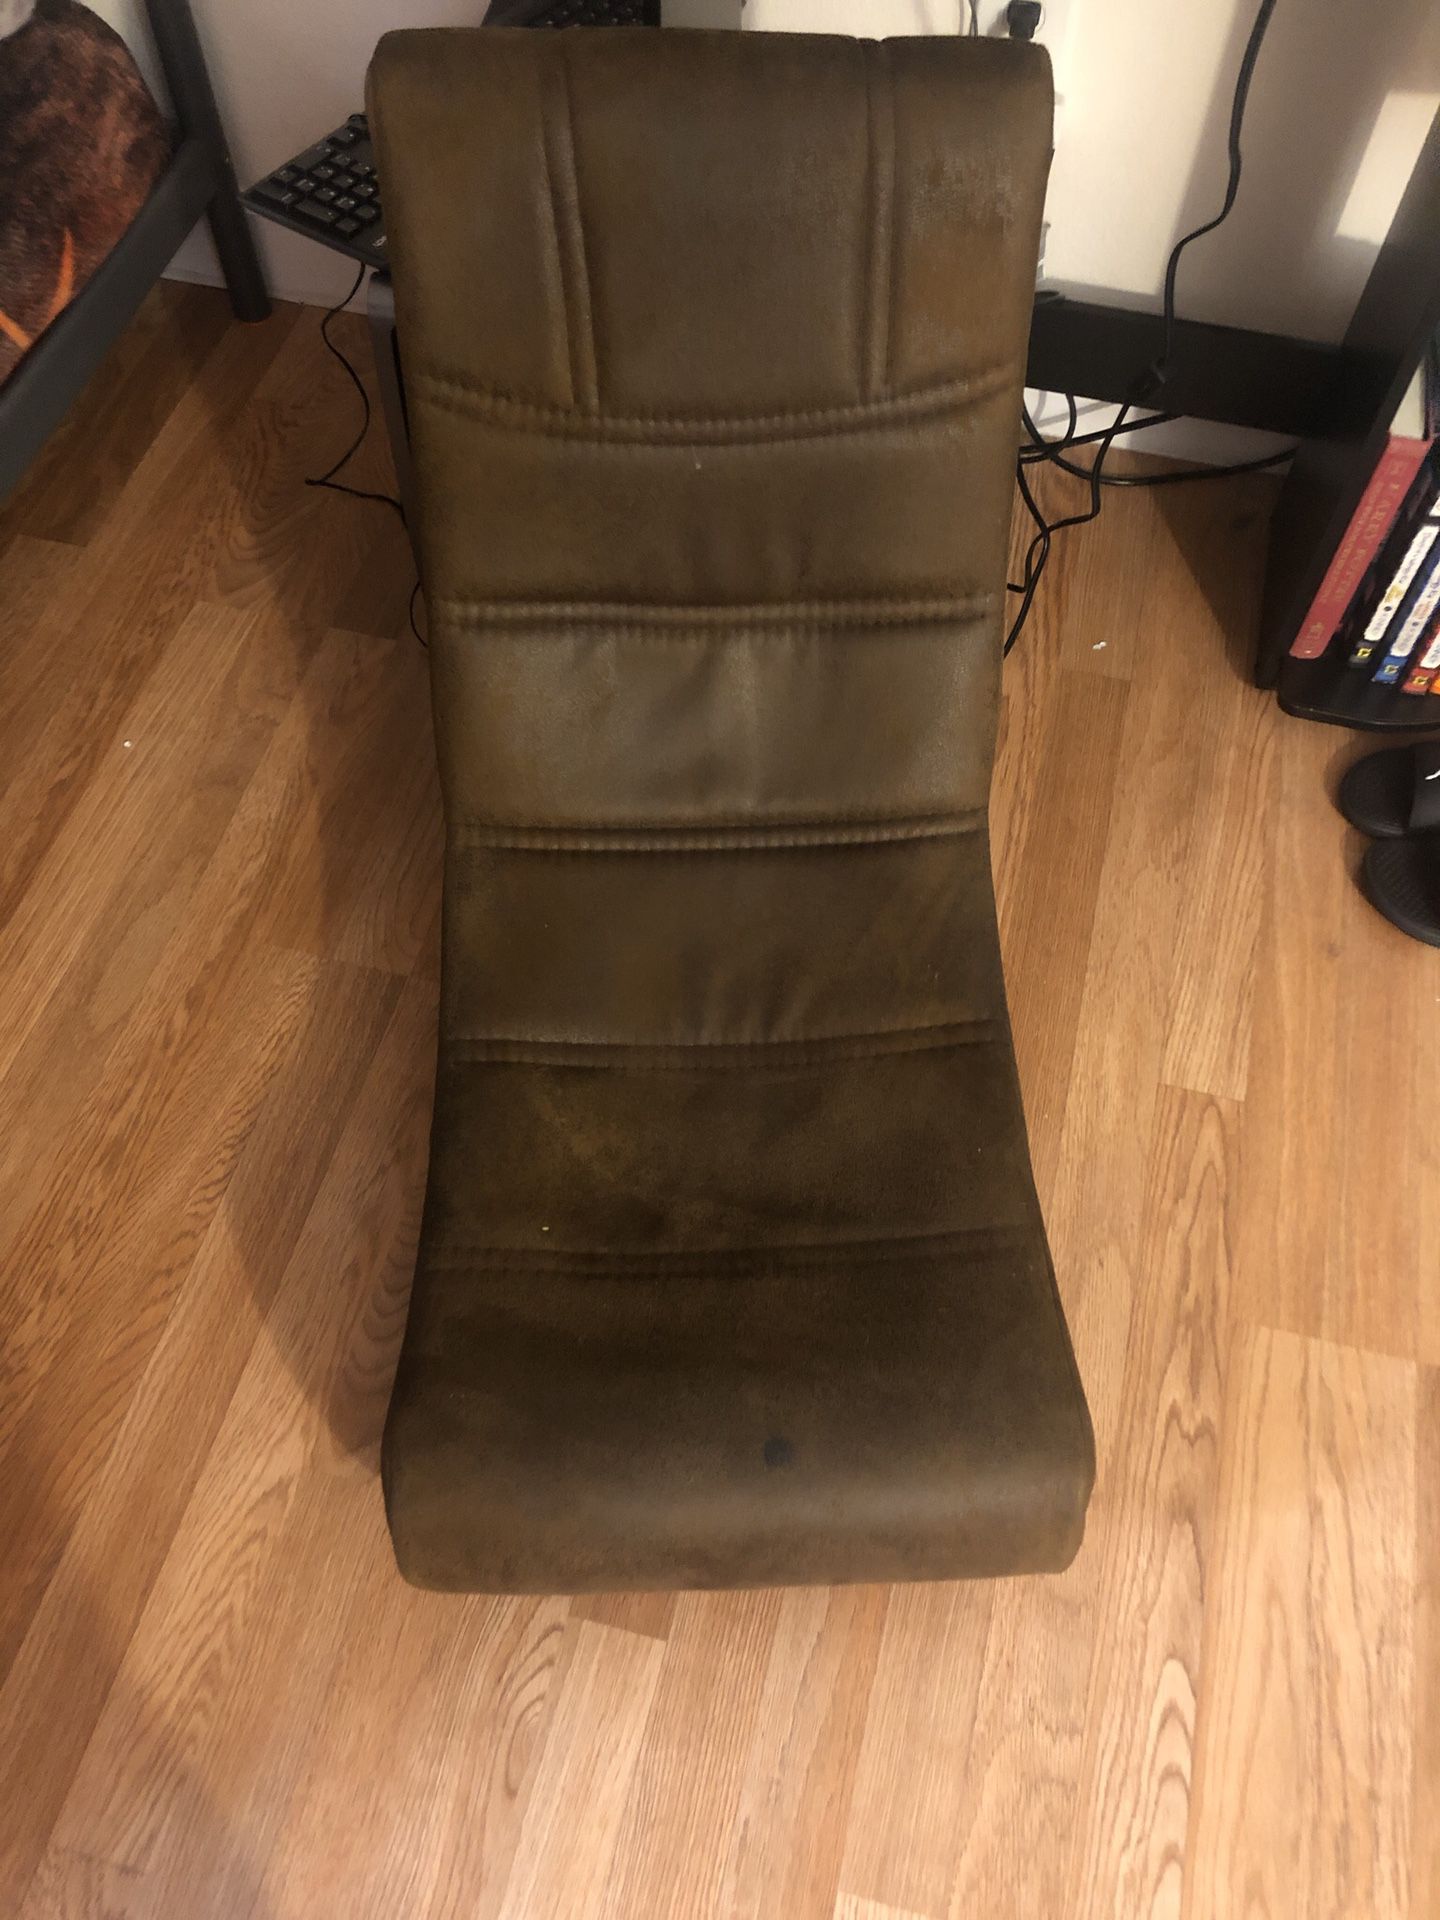 Gamer recliner chair with speakers